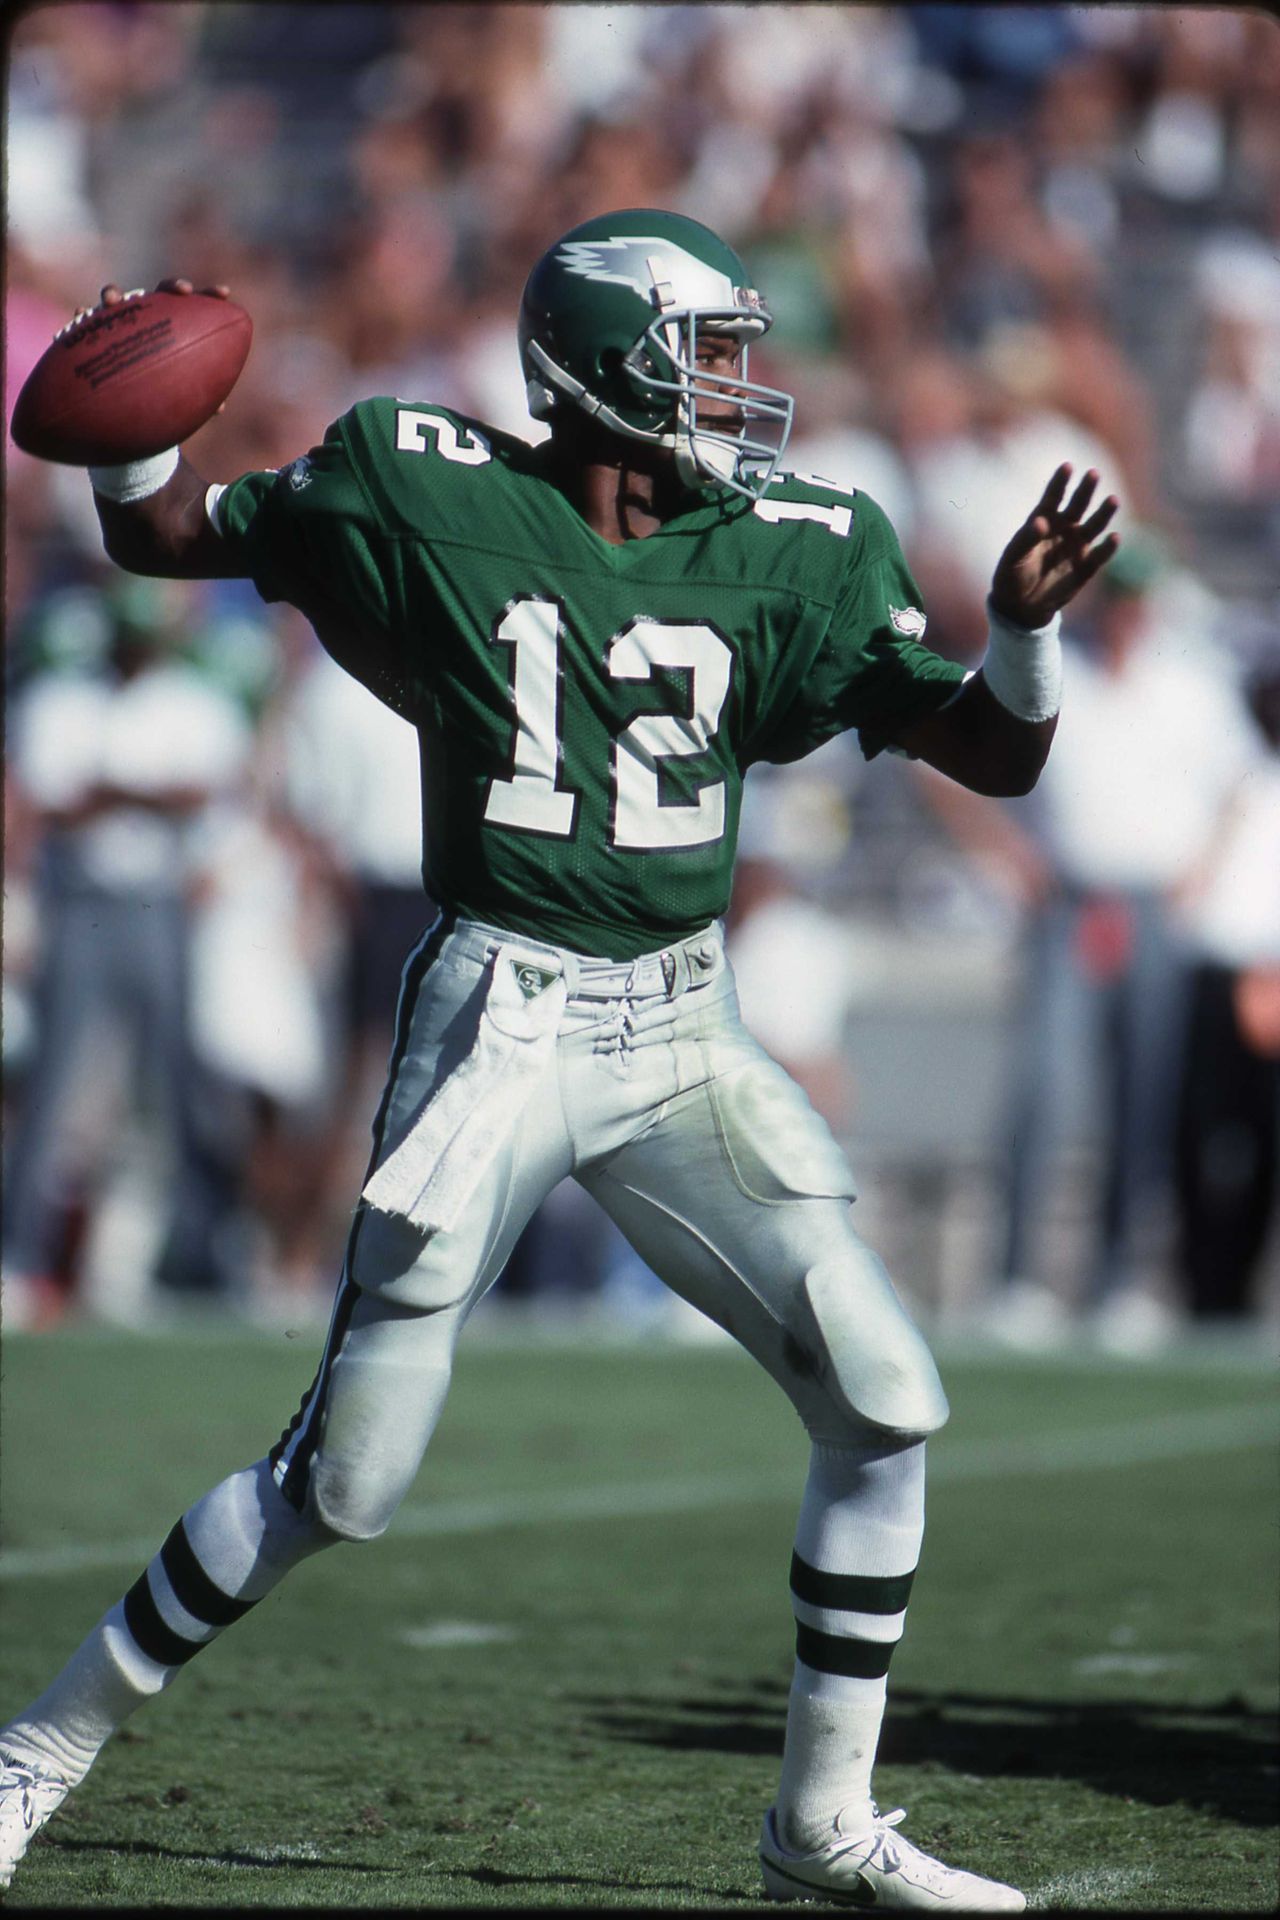 Happy Birthday to Randall Cunningham, who turns 54 today! 